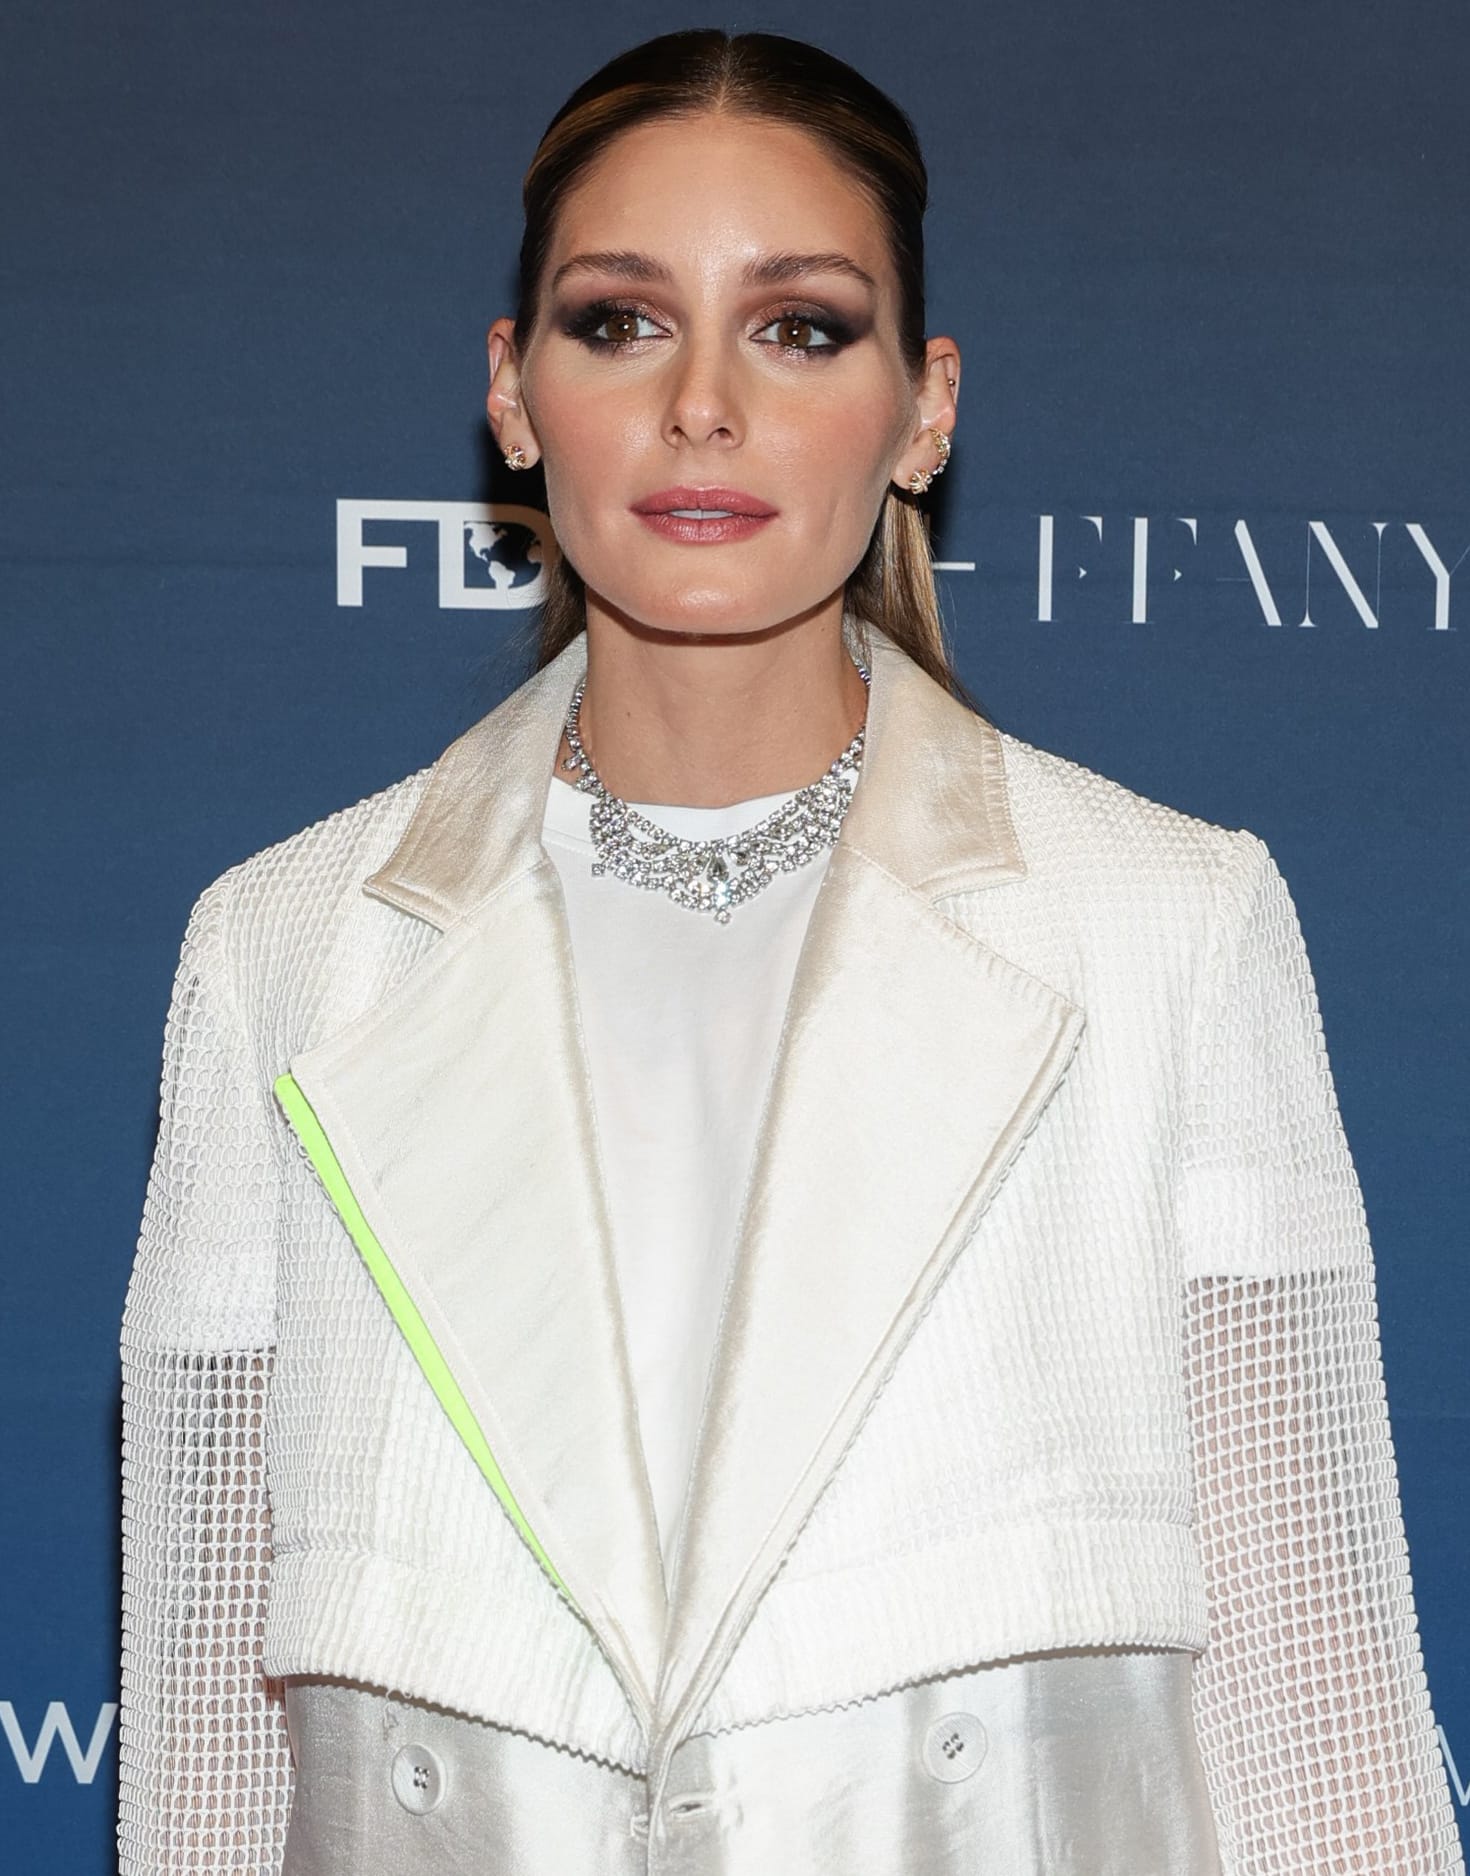 Olivia Palermo wears her tresses in a half-up, half-down style with black and pink smokey eyeshadow